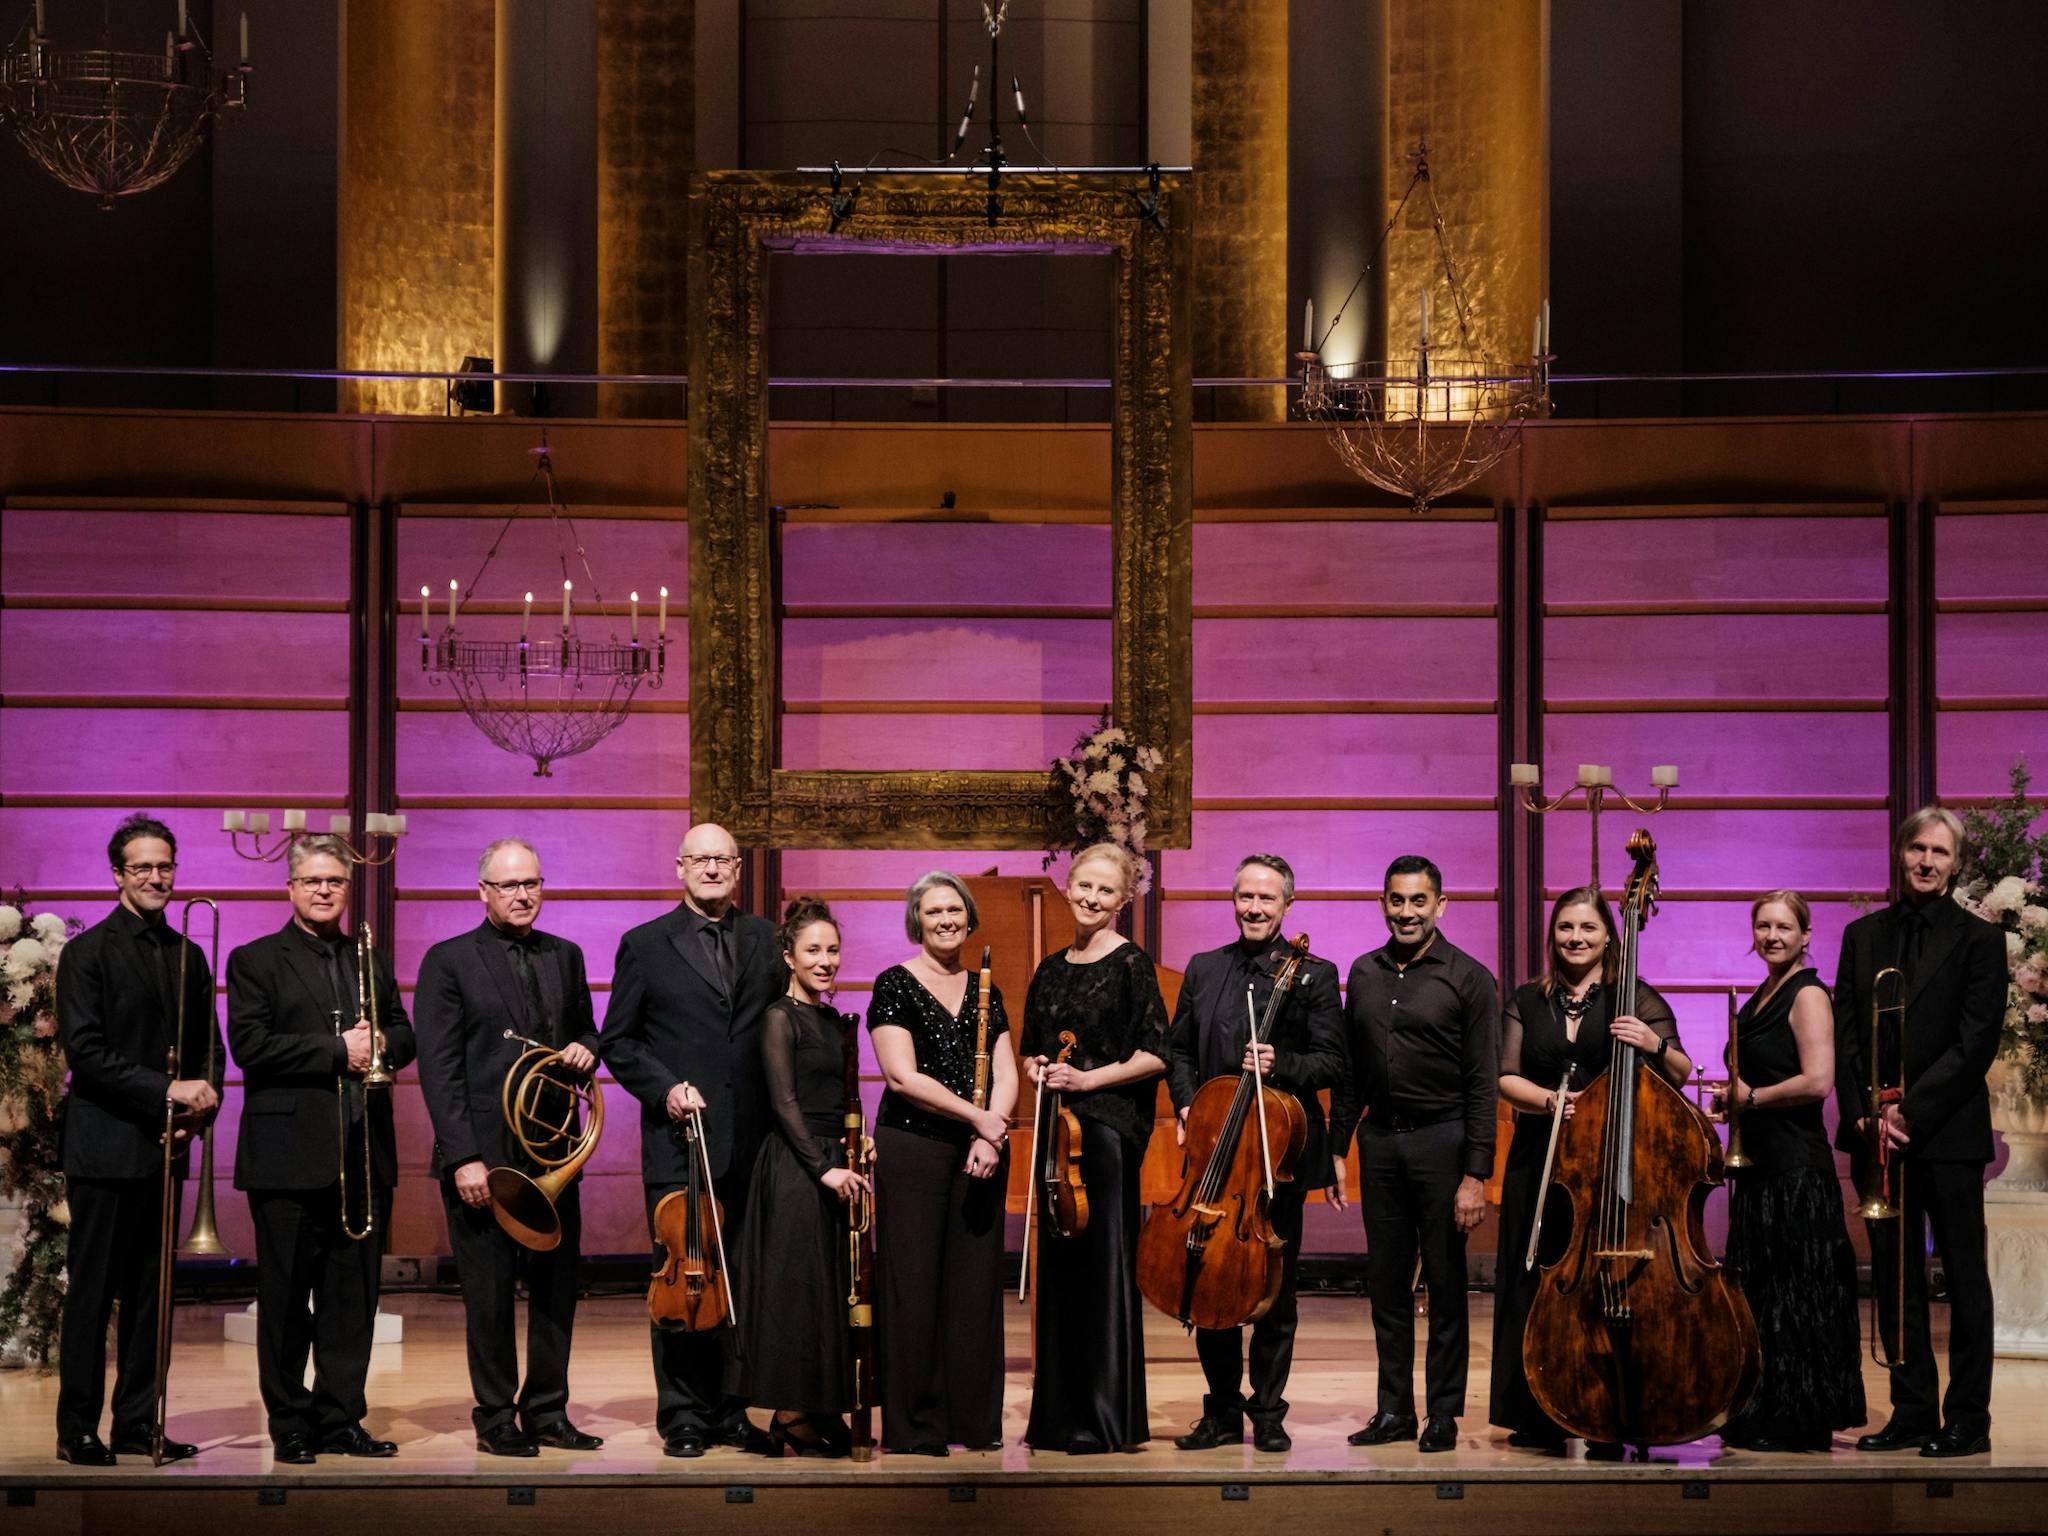 Orchestra standing onstage with period instruments.